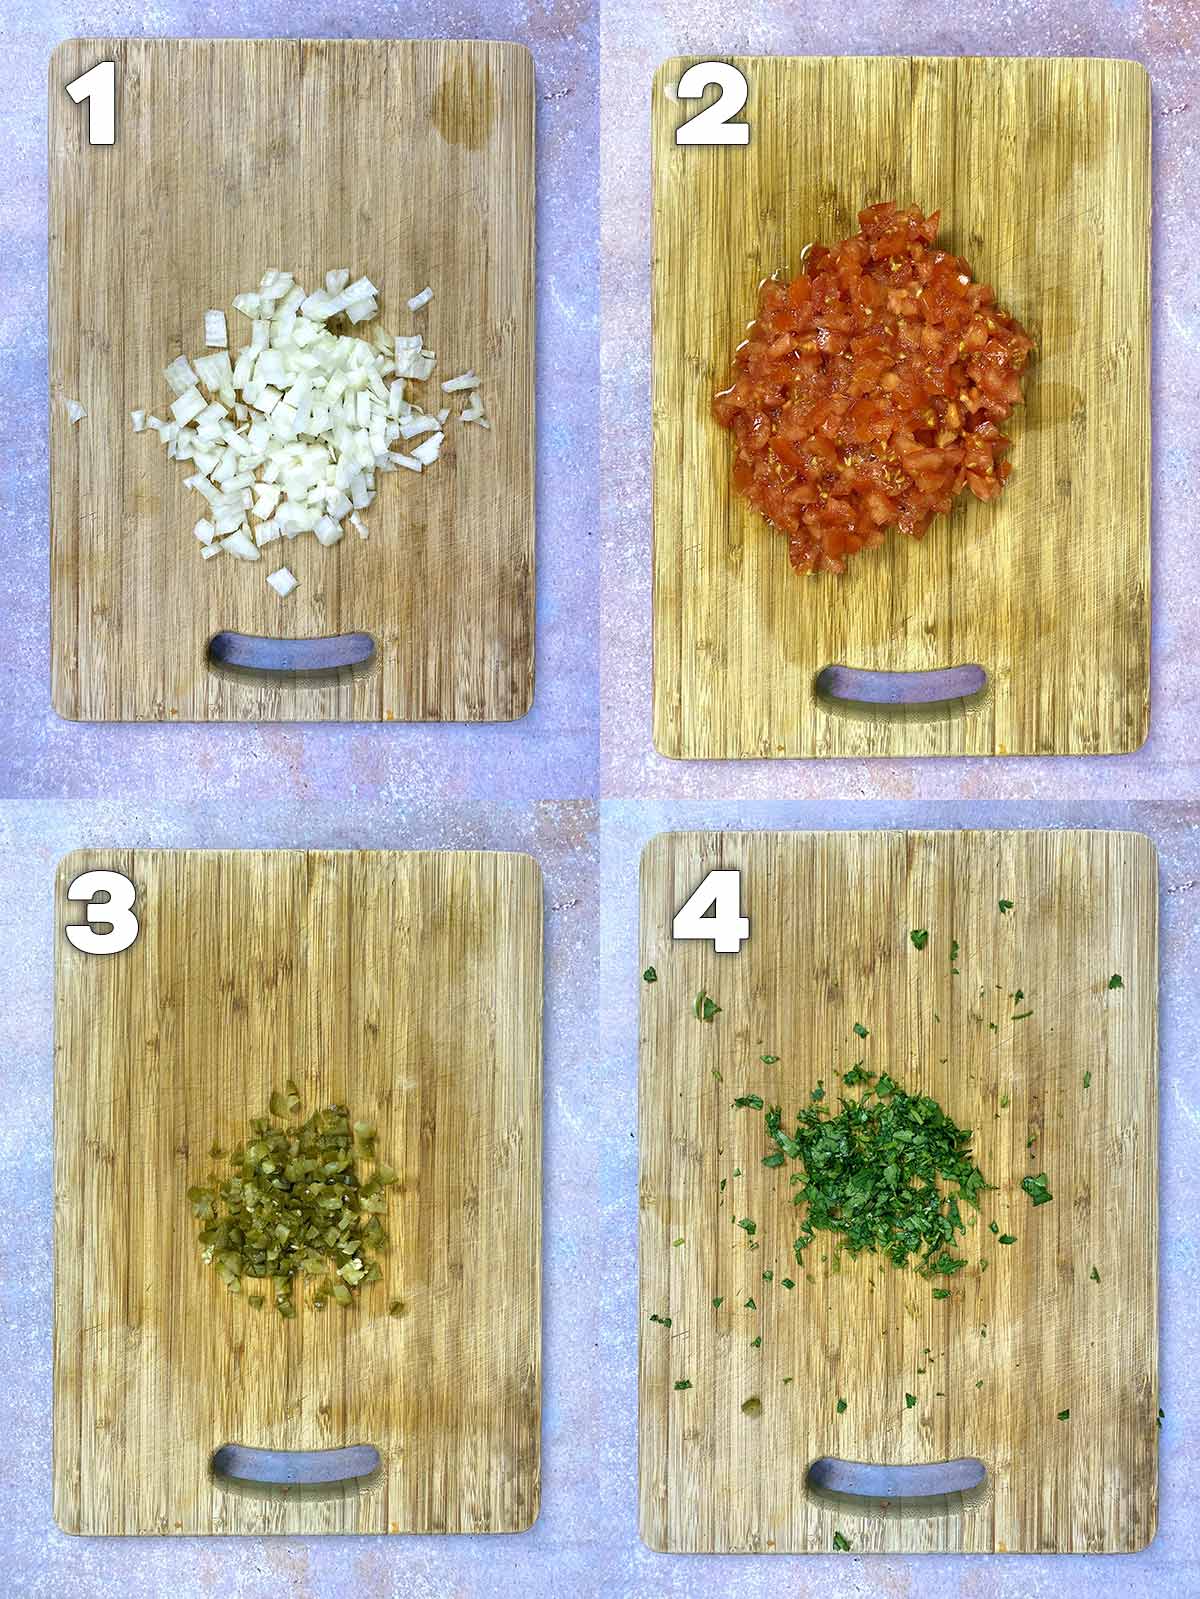 Four shot numbered collage of onions, tomatoes, jalapenos and coriander chopped on a wooden board.